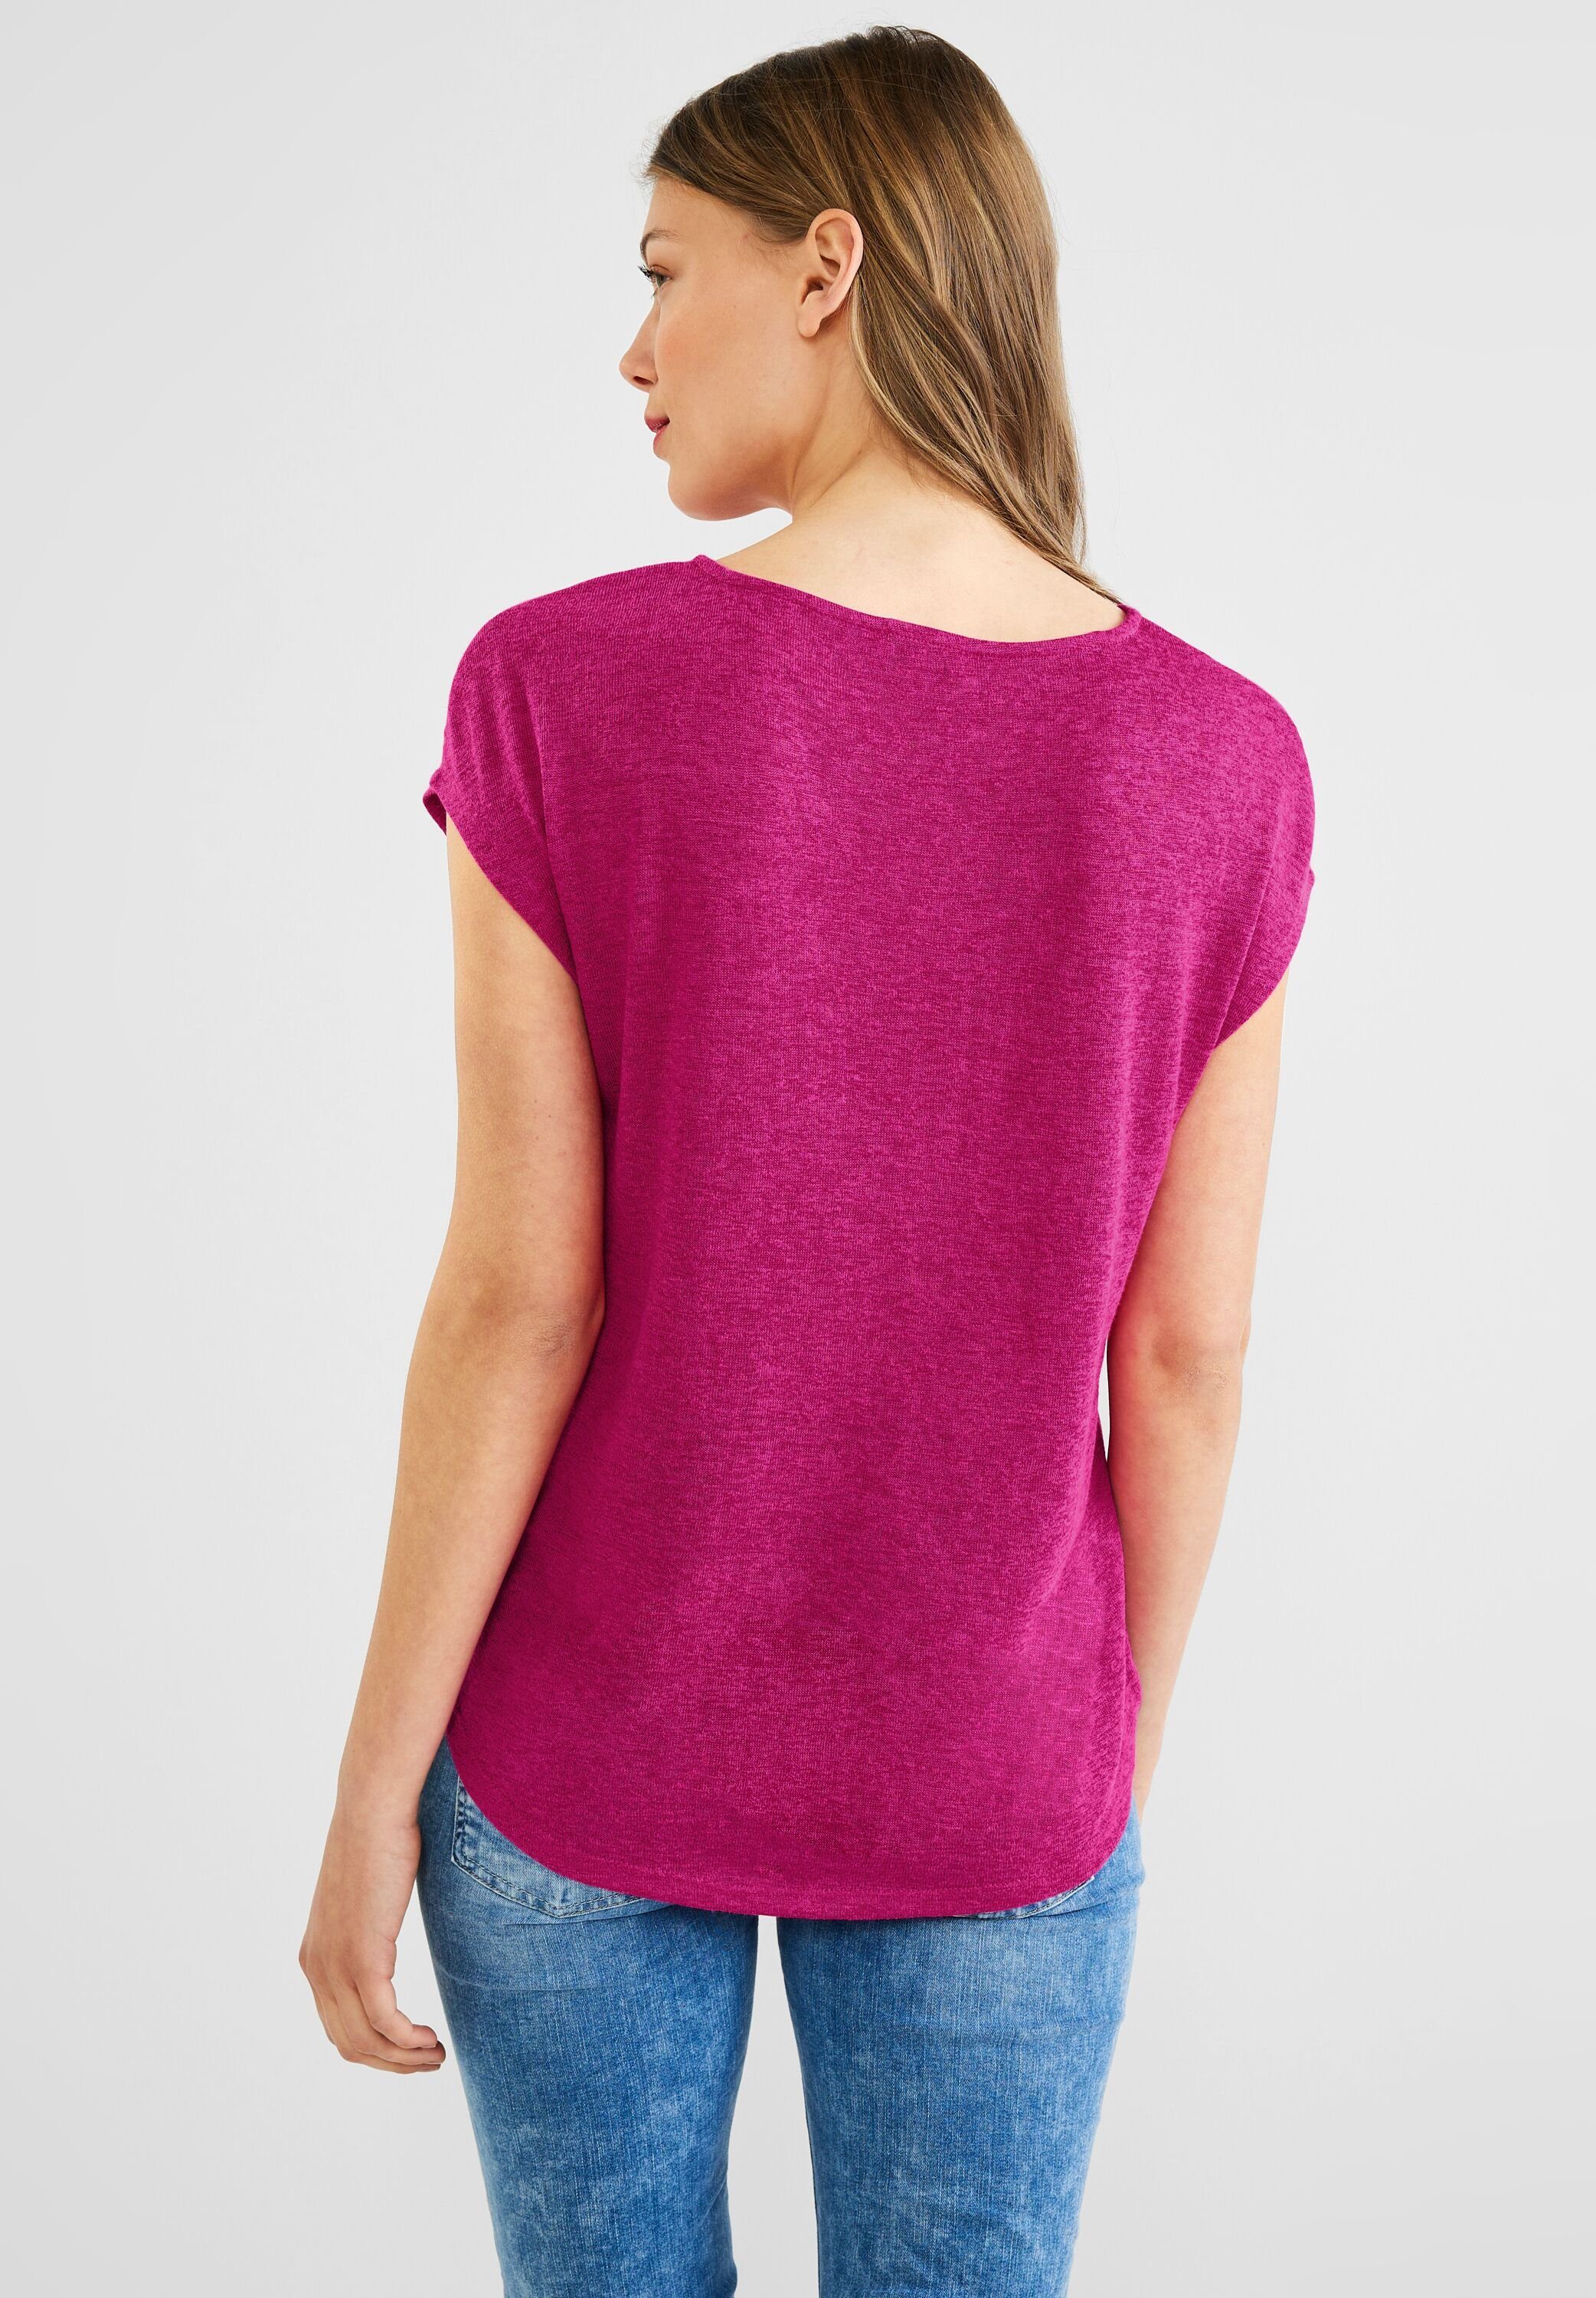 ONE Unifarbe V-Shirt pink oasis STREET in